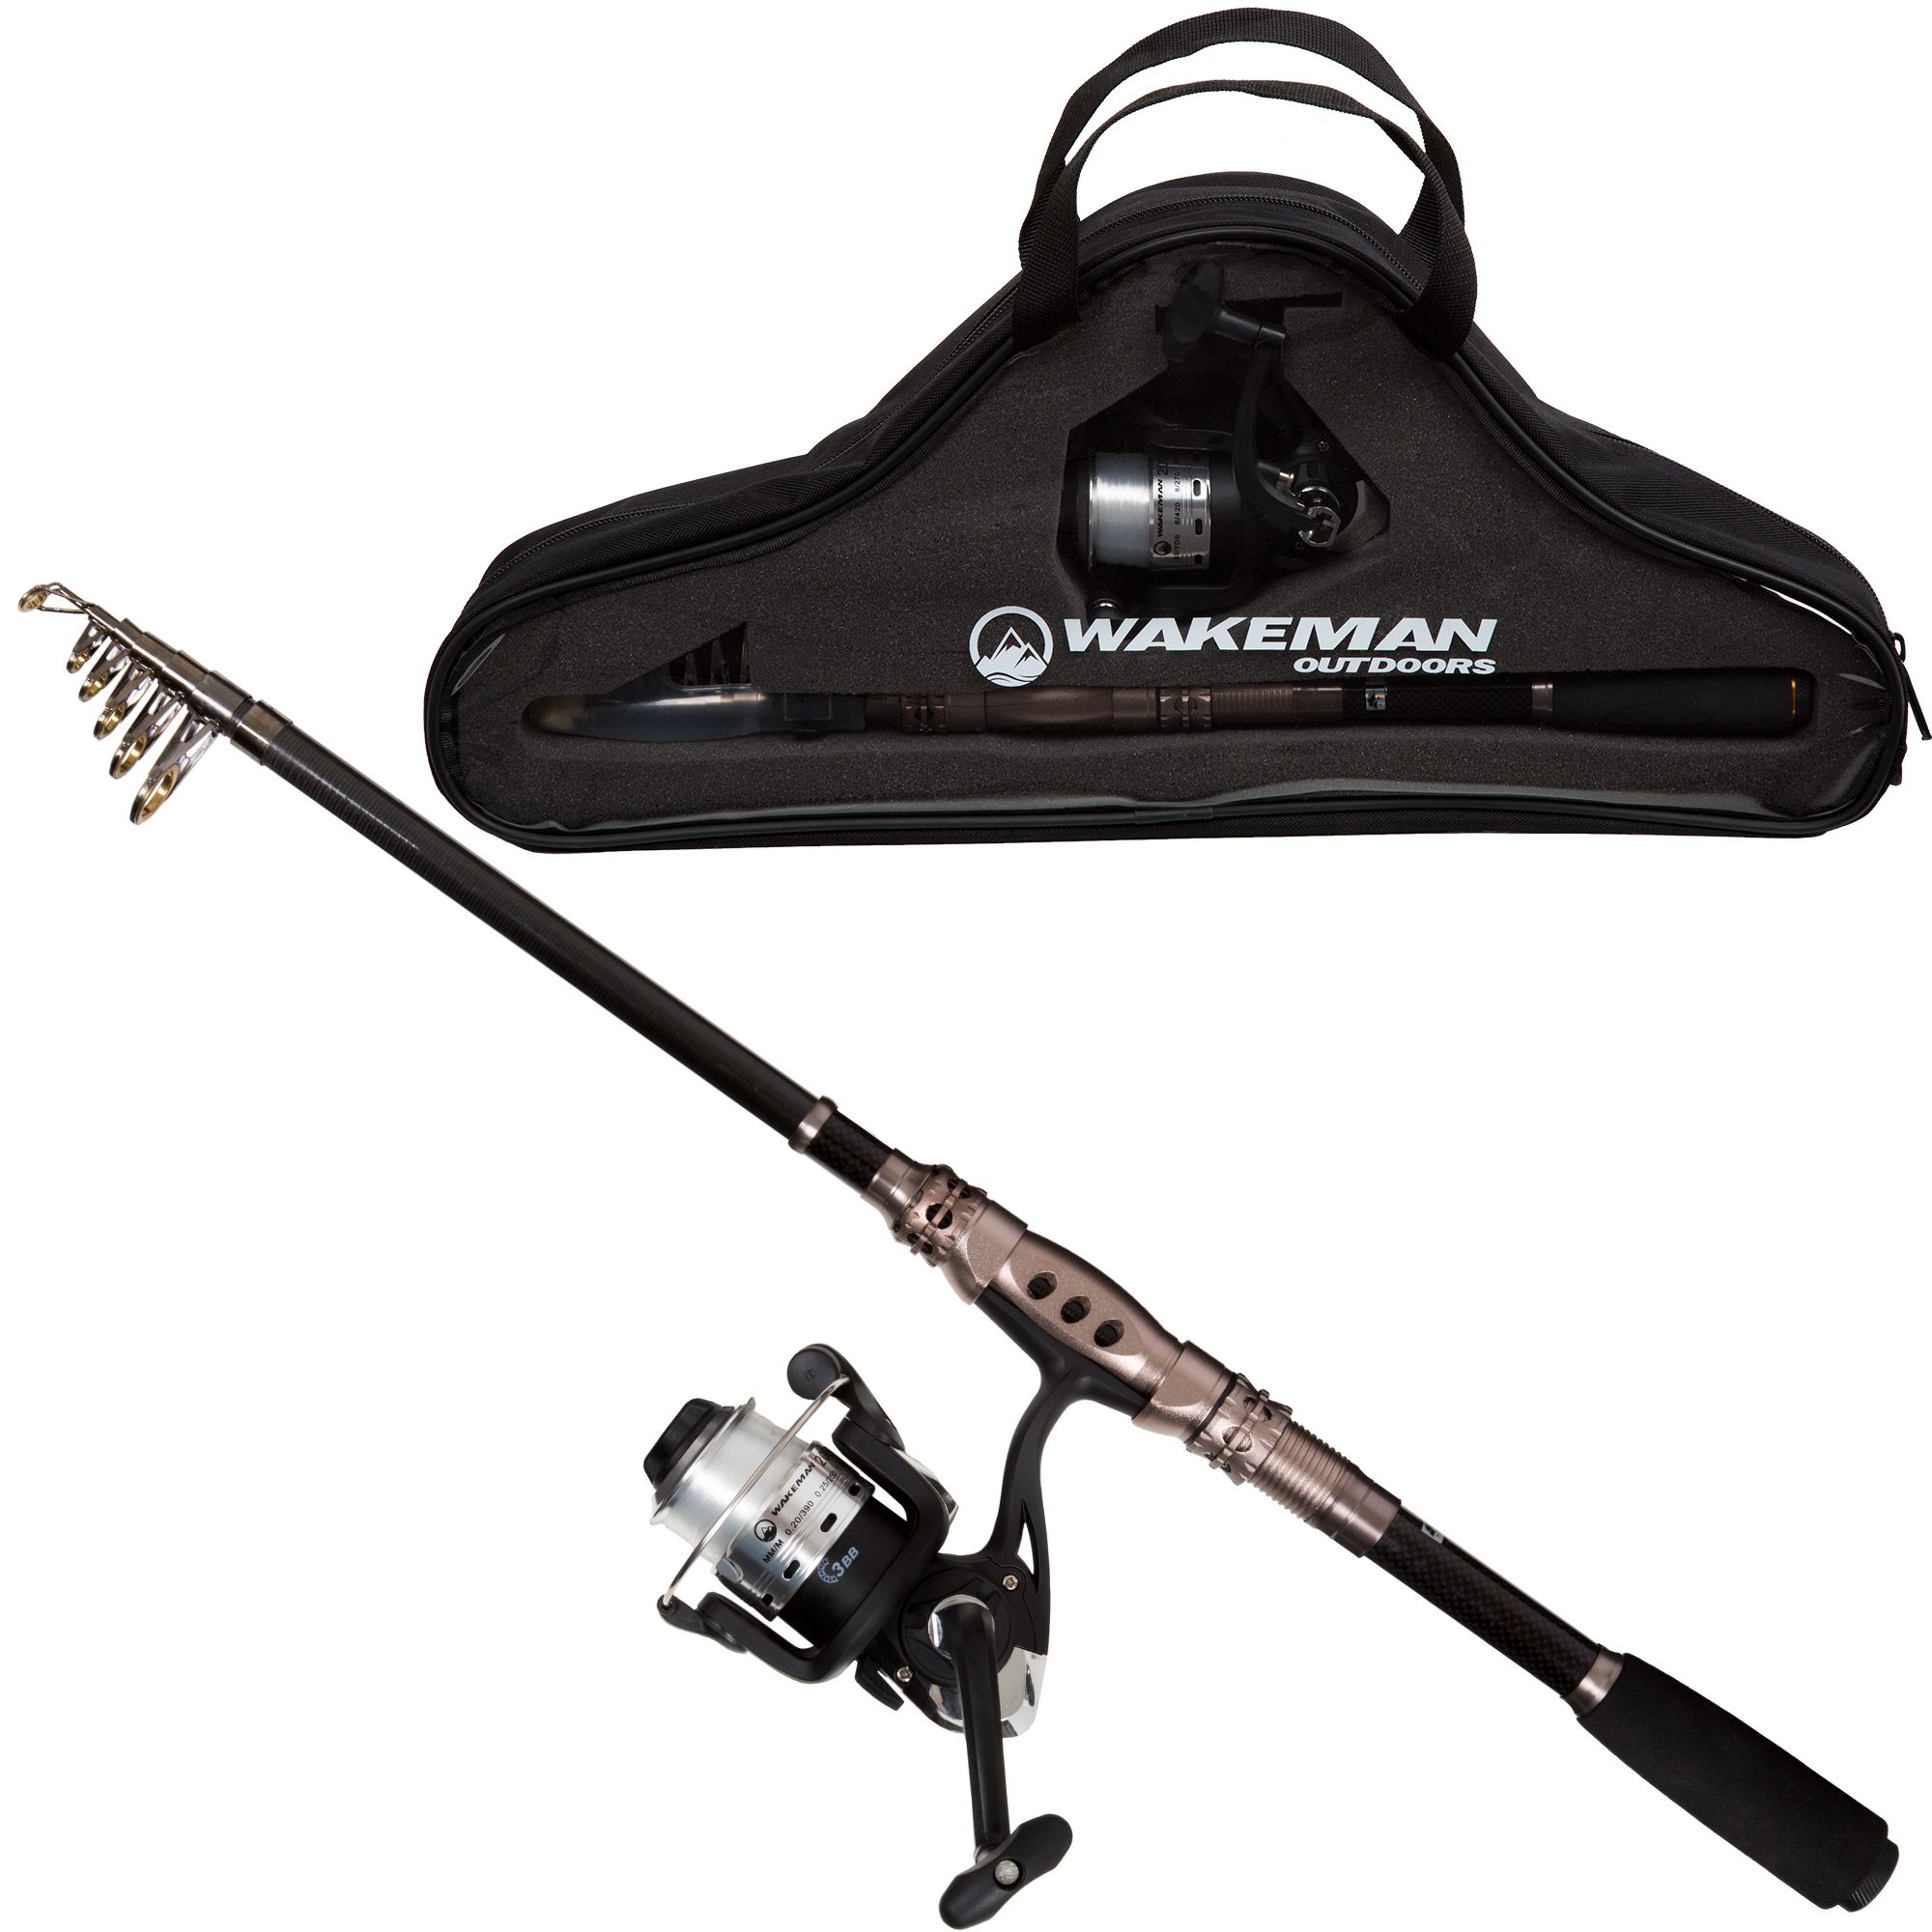 Wakeman Ultra Series Telescoping 7'2 Rod and Spinning Reel Combo